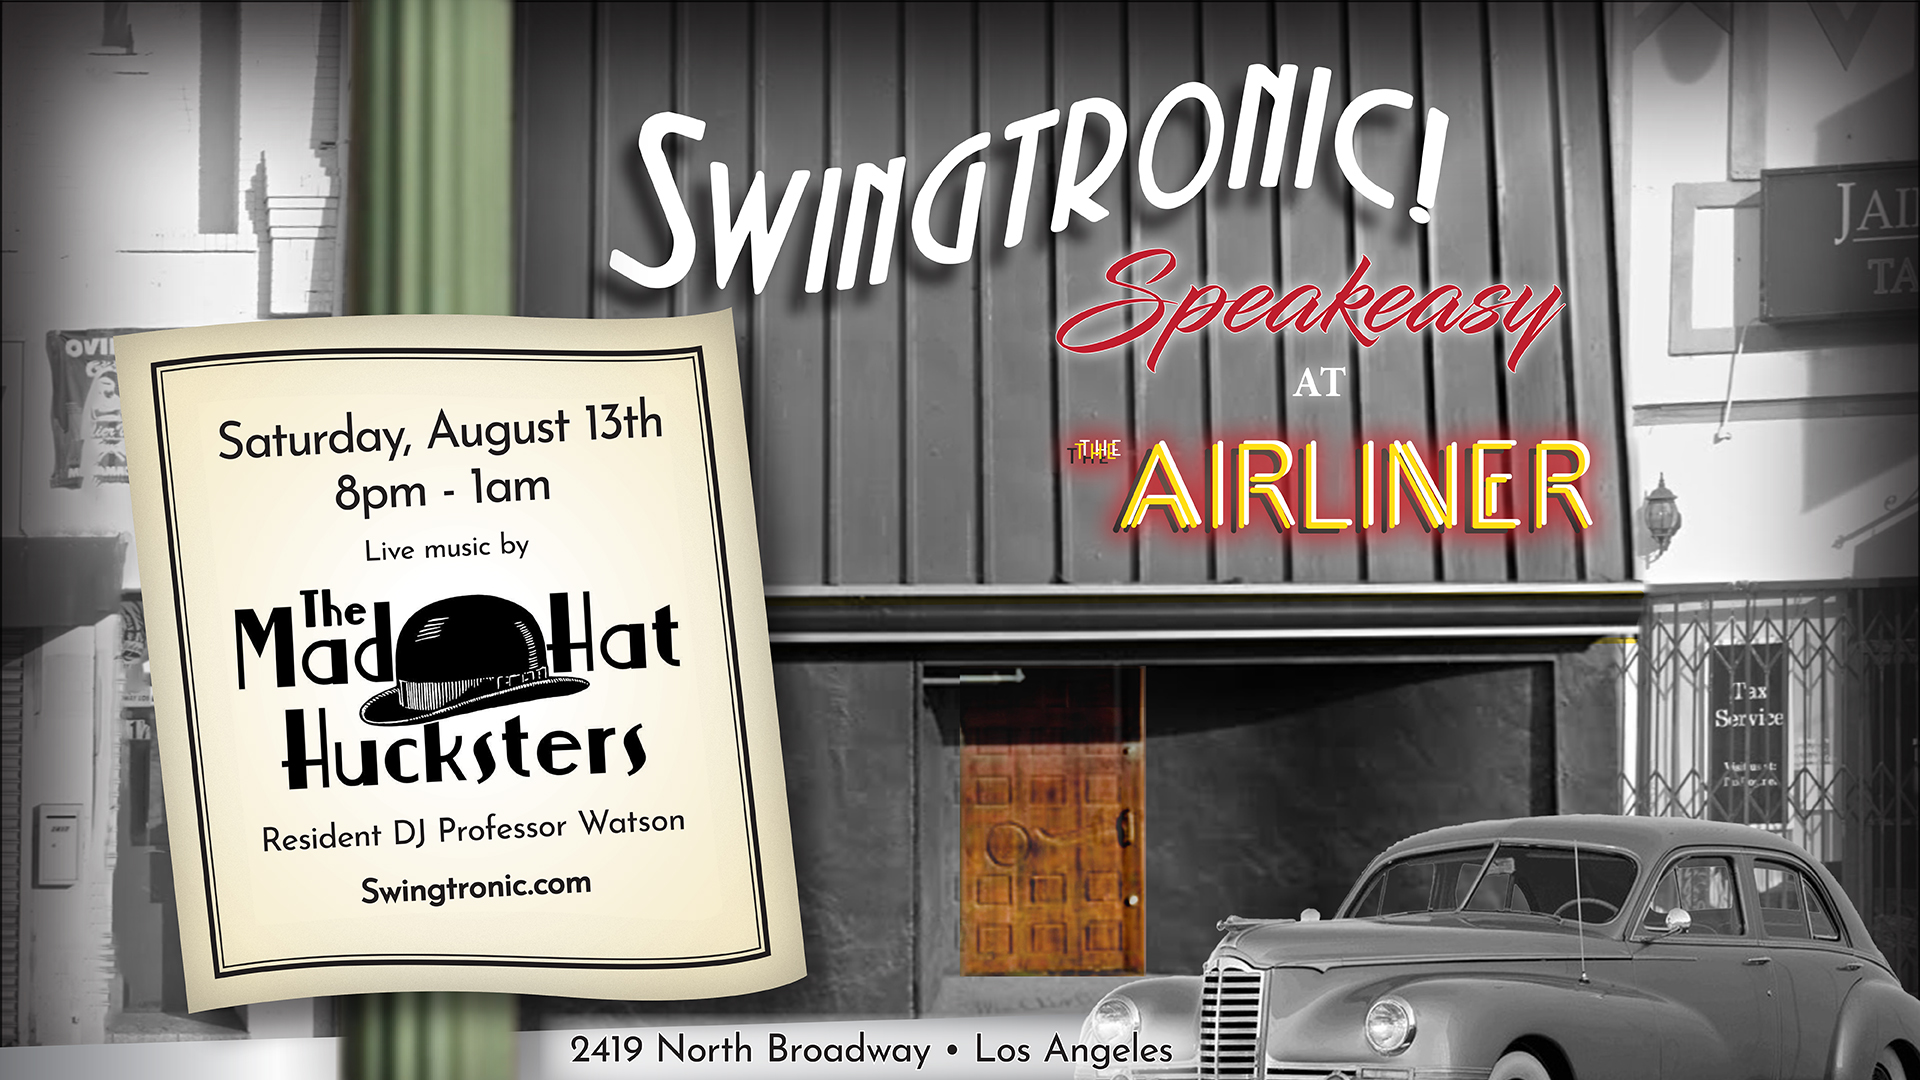 Swingtronic ONE YEAR ANNIVERSARY Party w/ The Mad Hat Hucksters!